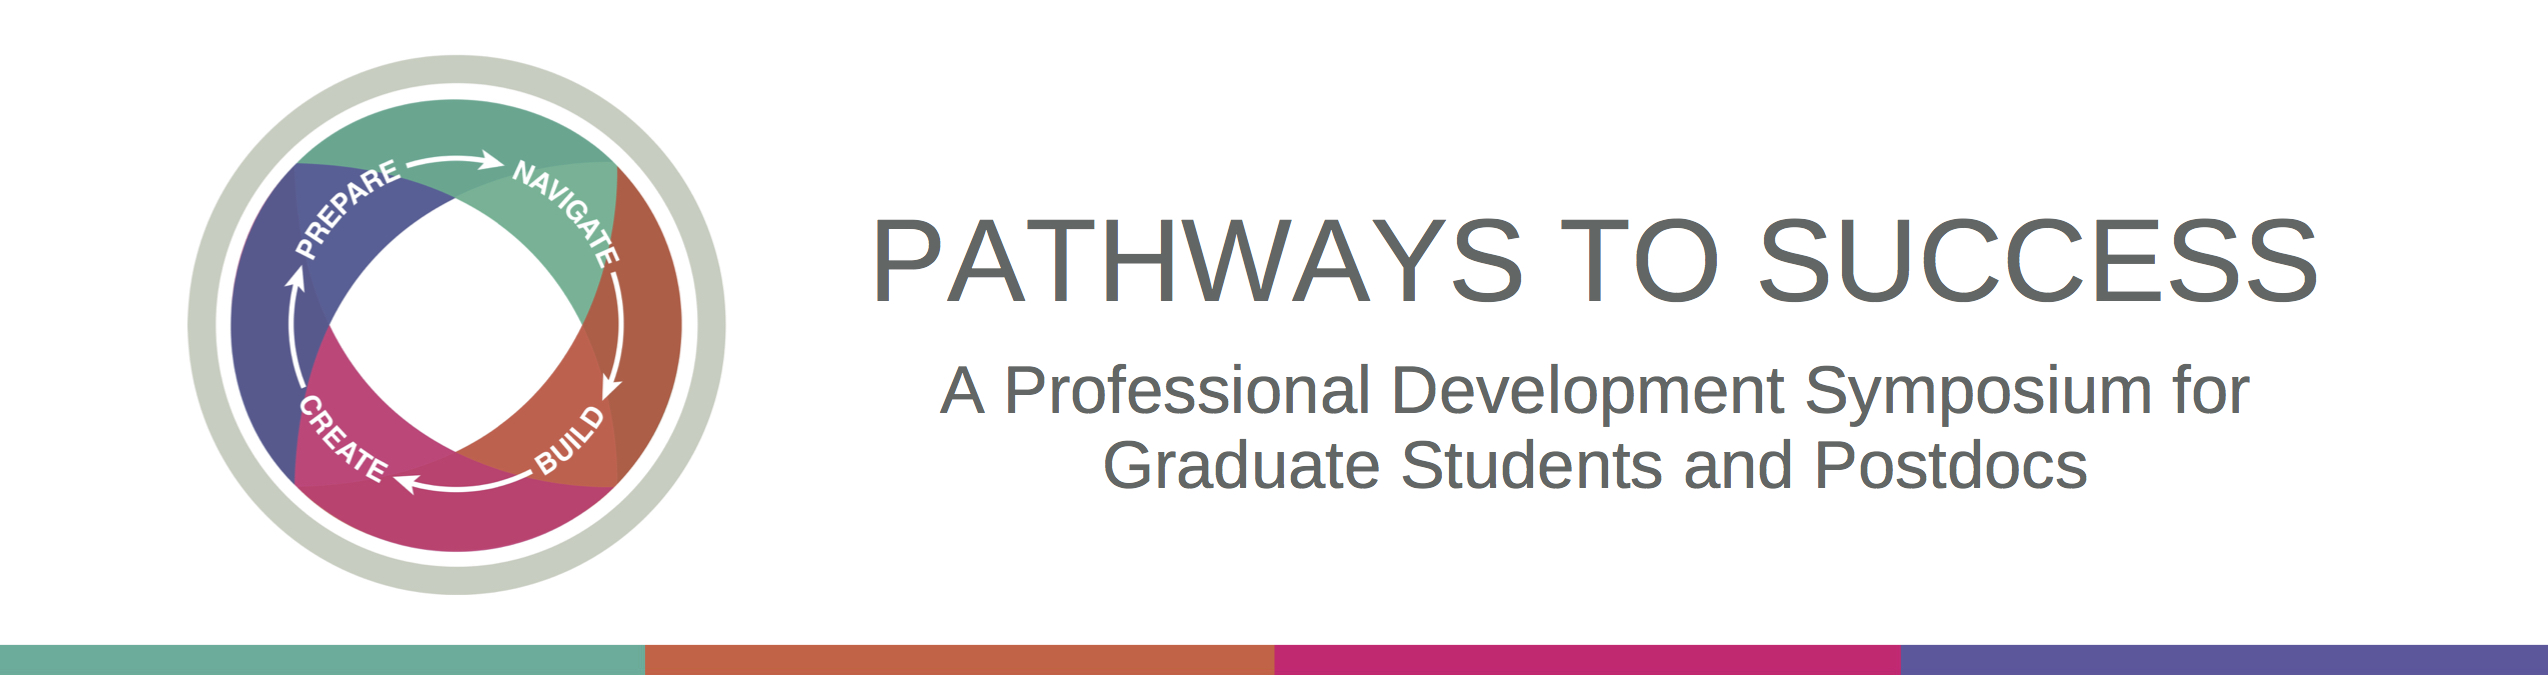 Pathways to Success: A Professional Development Symposium for Graduate Students and Postdocs